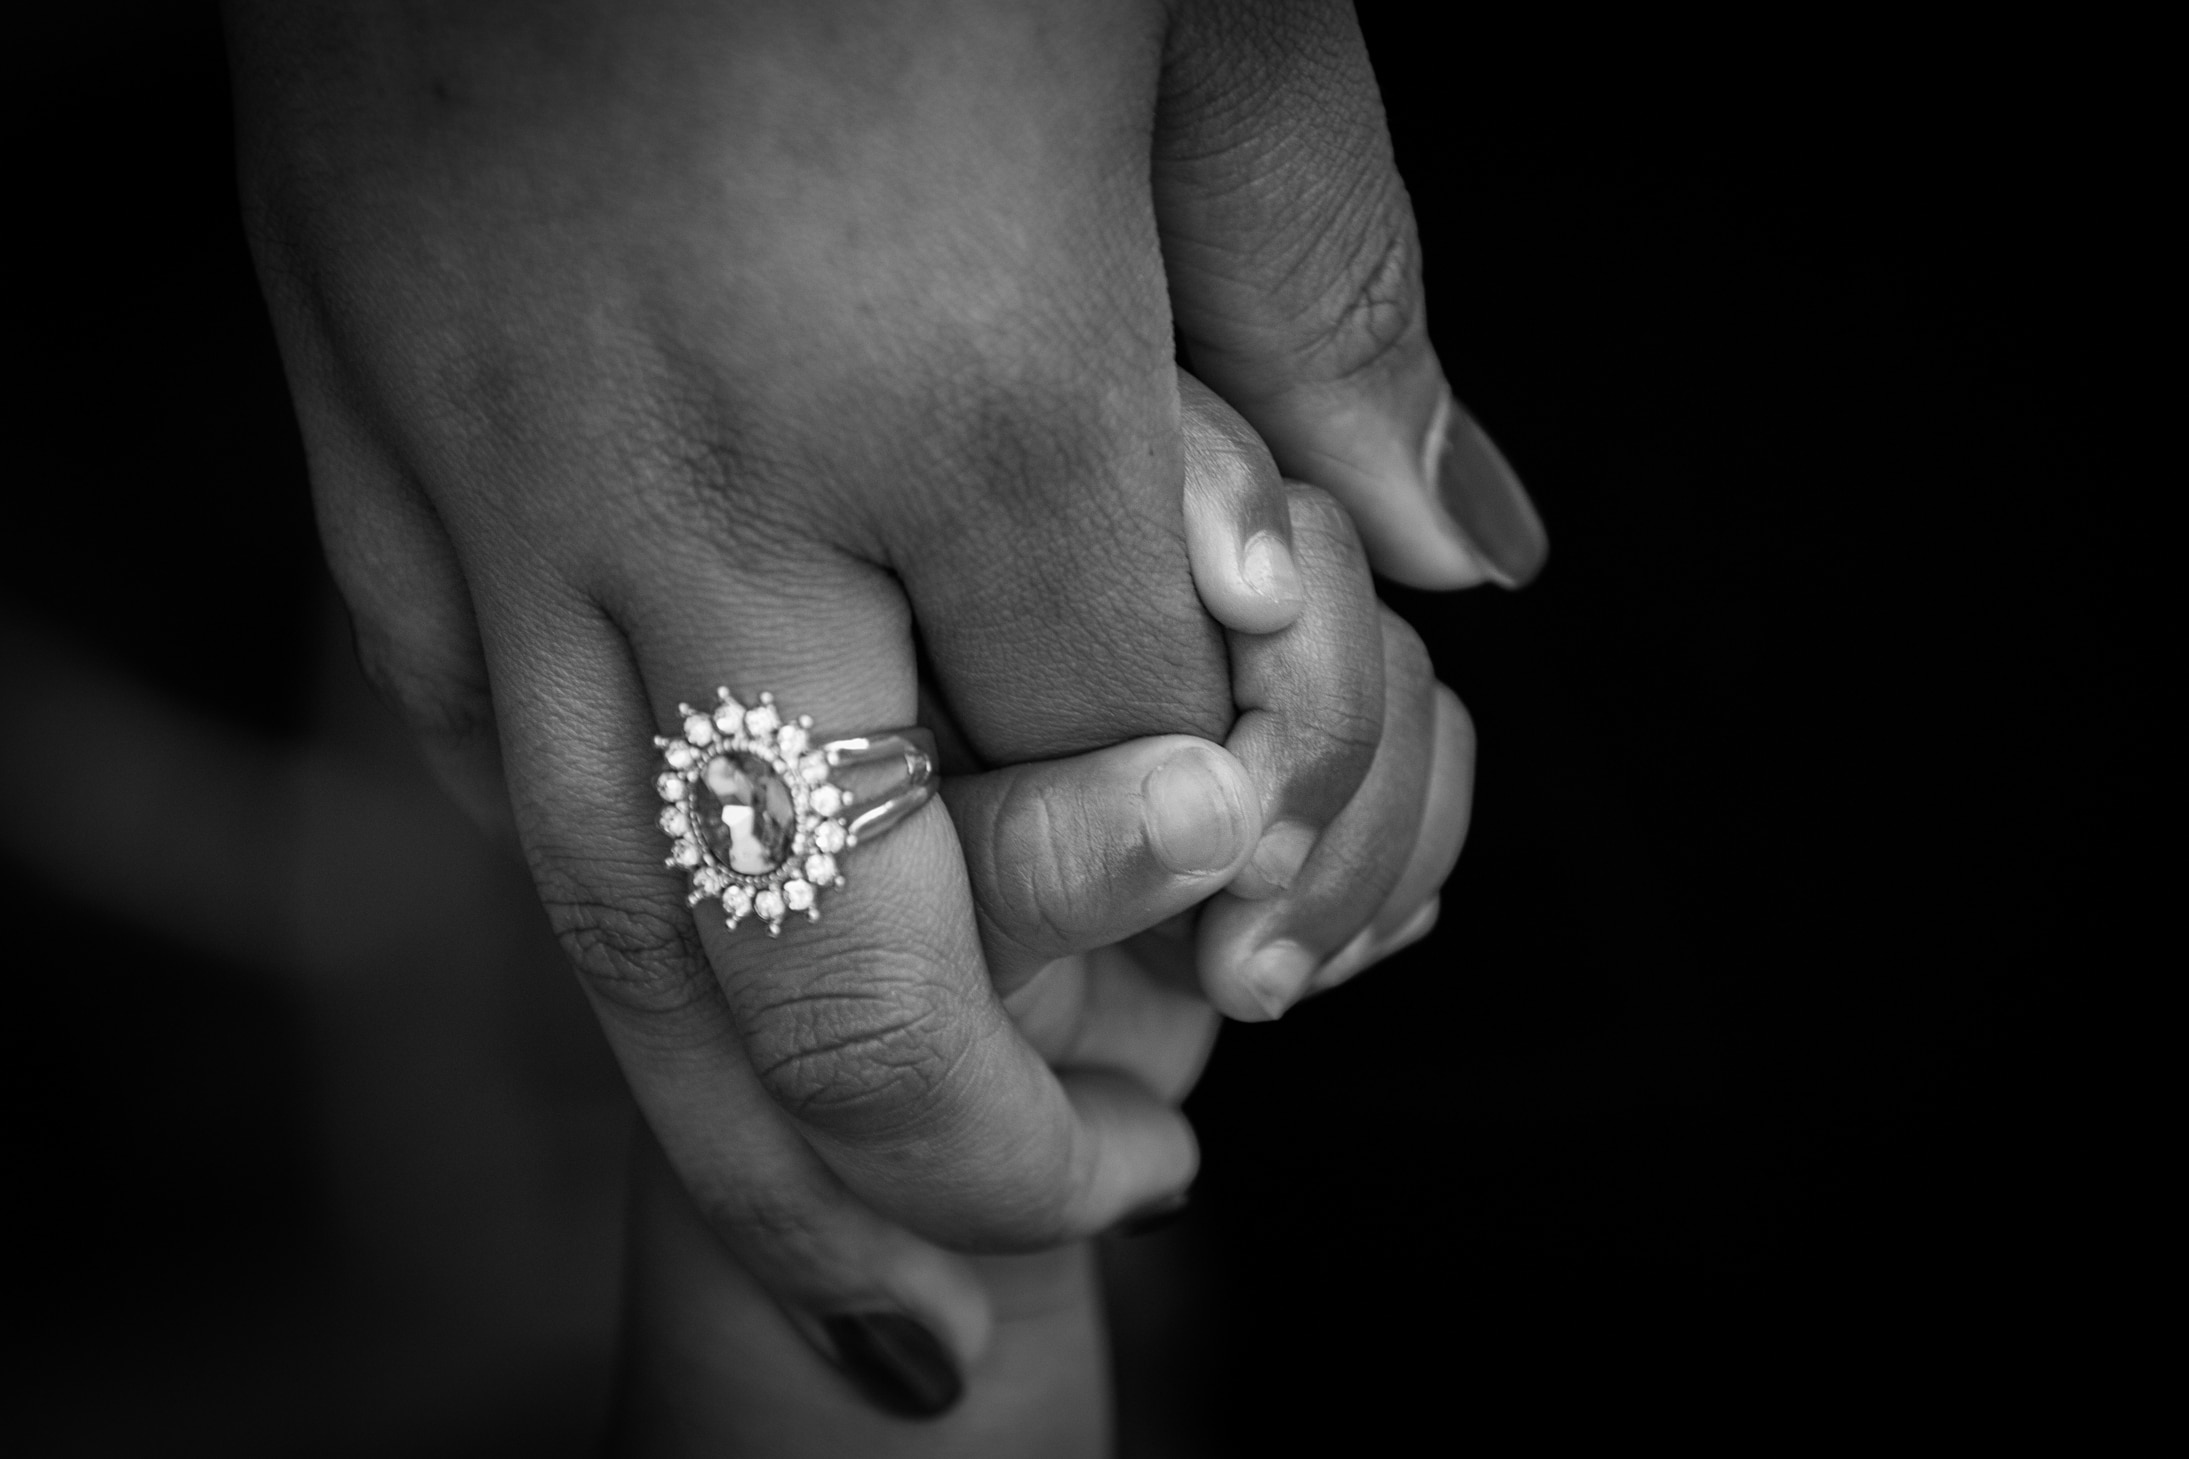 mother with silver diamond rimg holding baby's hand